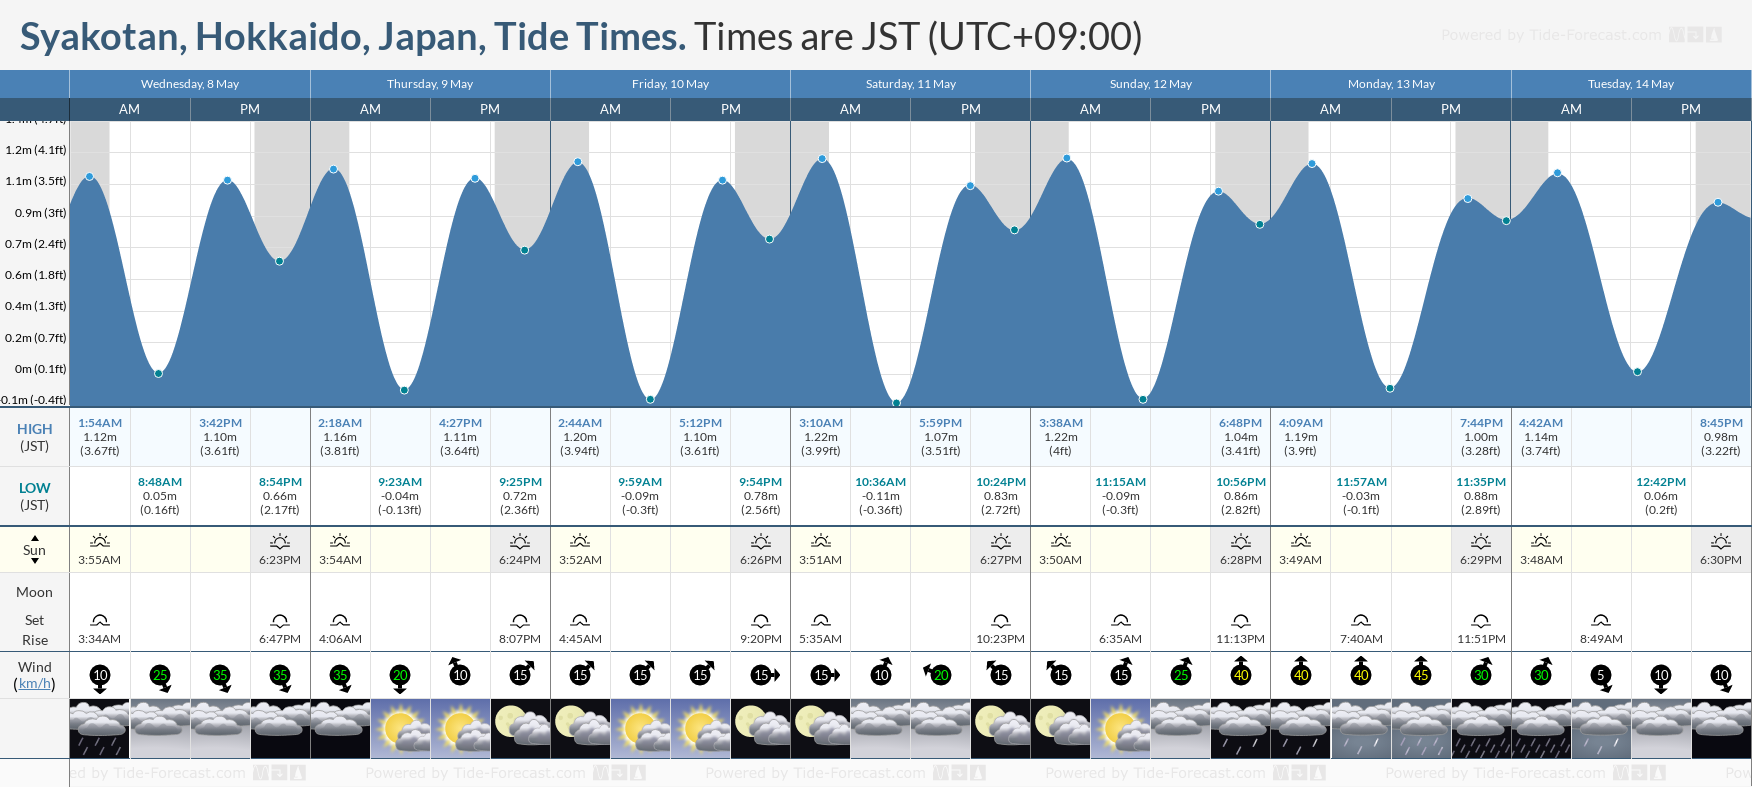 Syakotan, Hokkaido, Japan Tide Chart including high and low tide tide times for the next 7 days